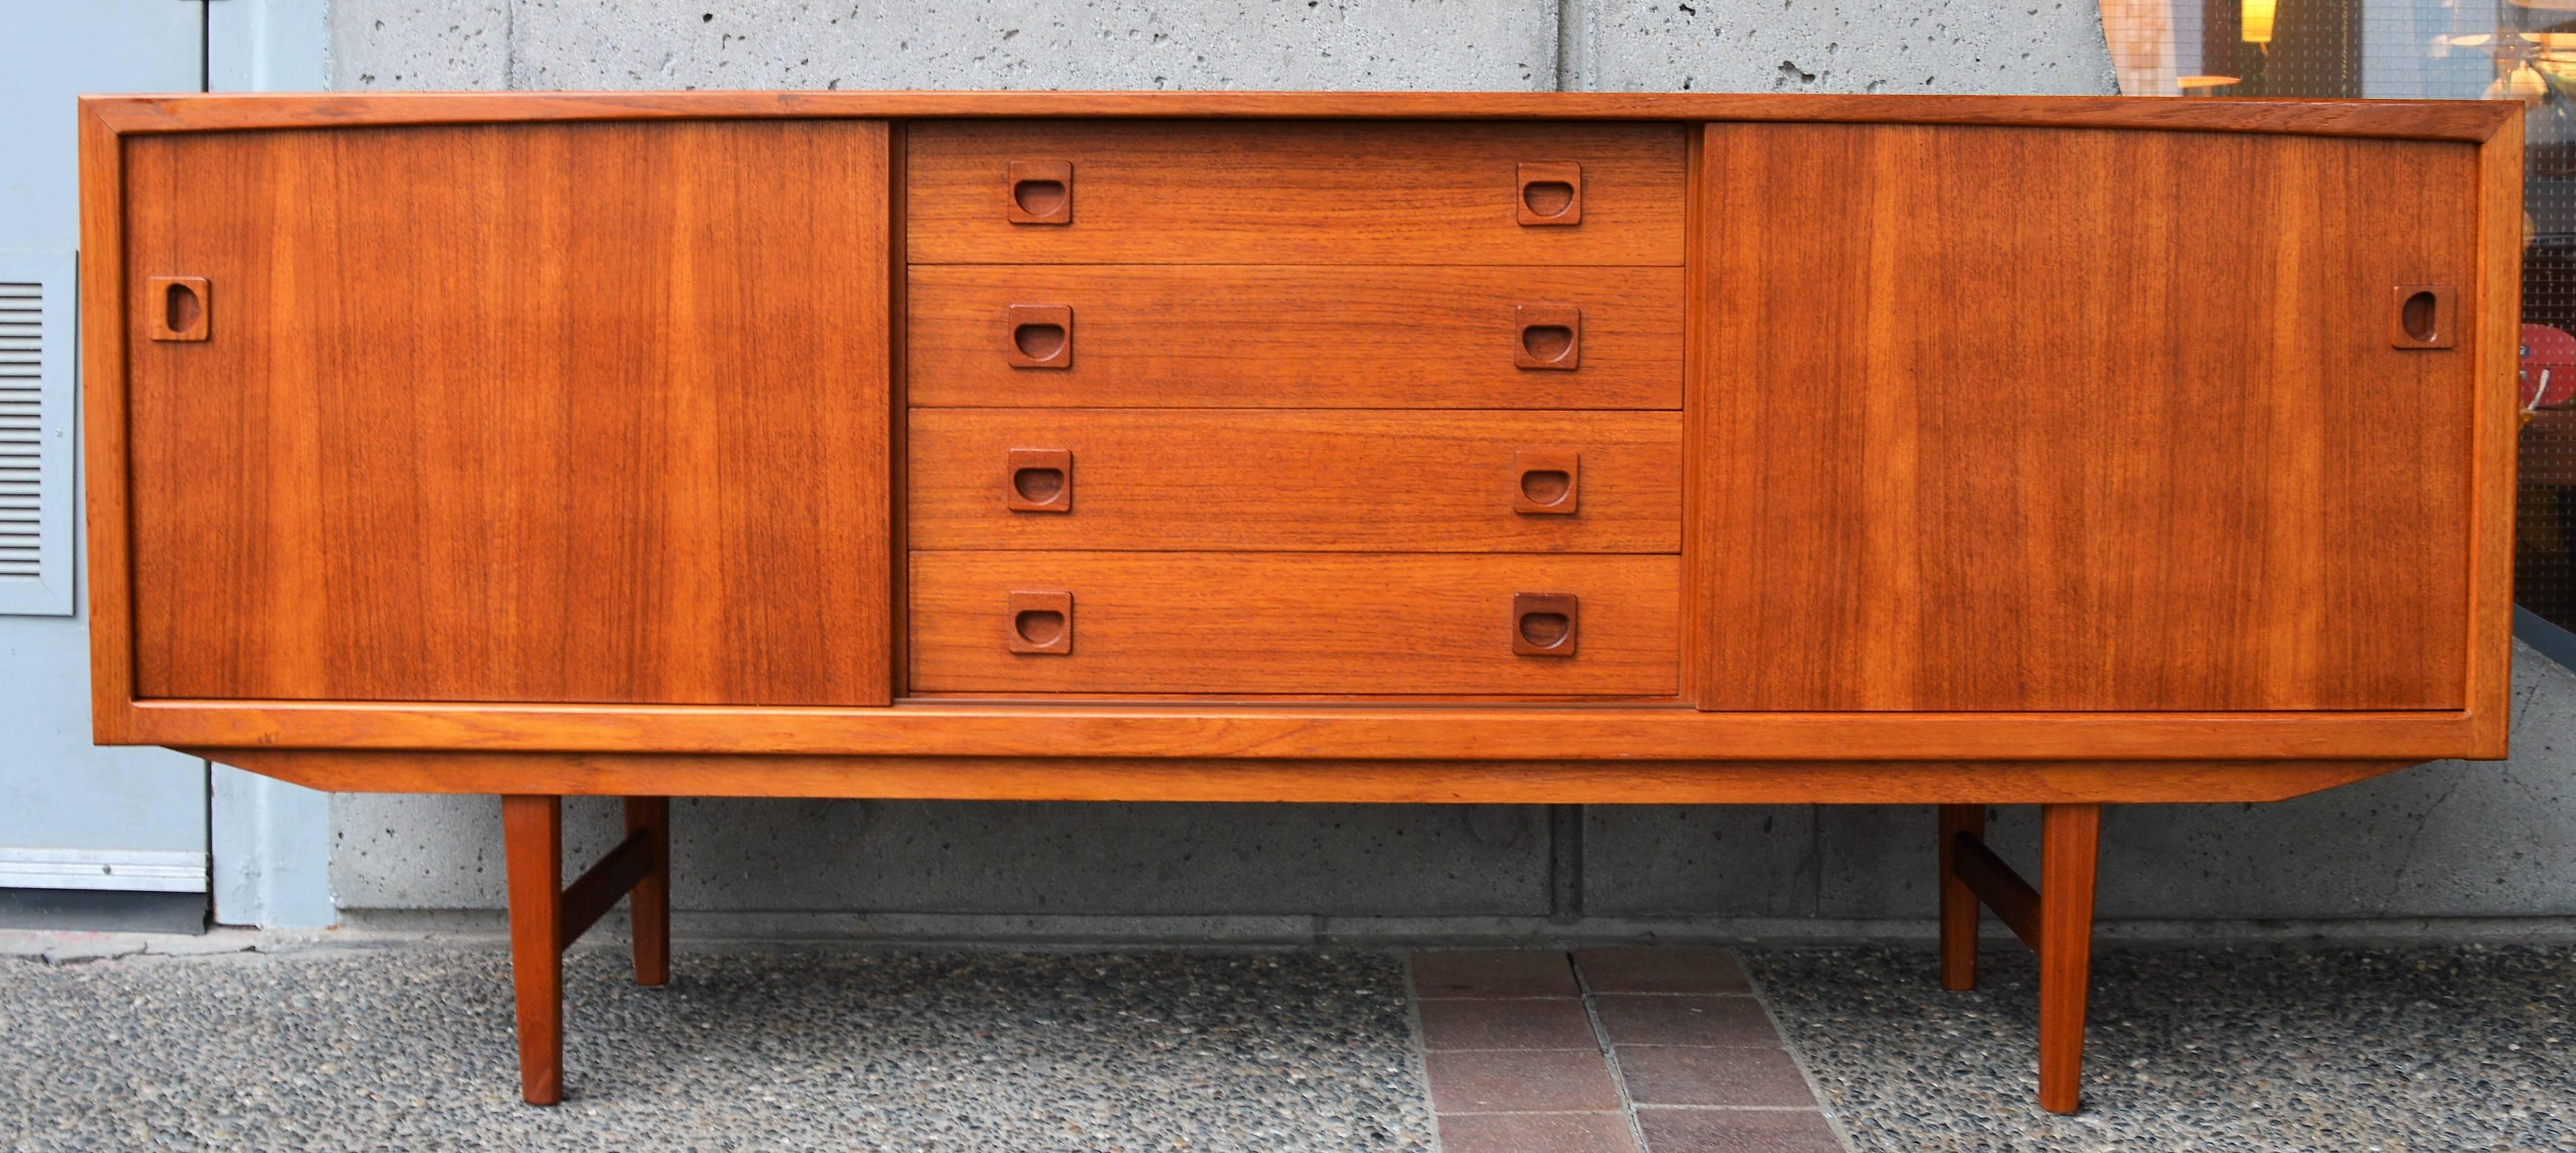 This gorgeous Danish modern teak buffet/credenza has awesome styling. Featuring a sweet front edge molding at the top, which arcs and tapers towards the middle - an Atomic Era style reference to the old TV screens. The center is a bank of four